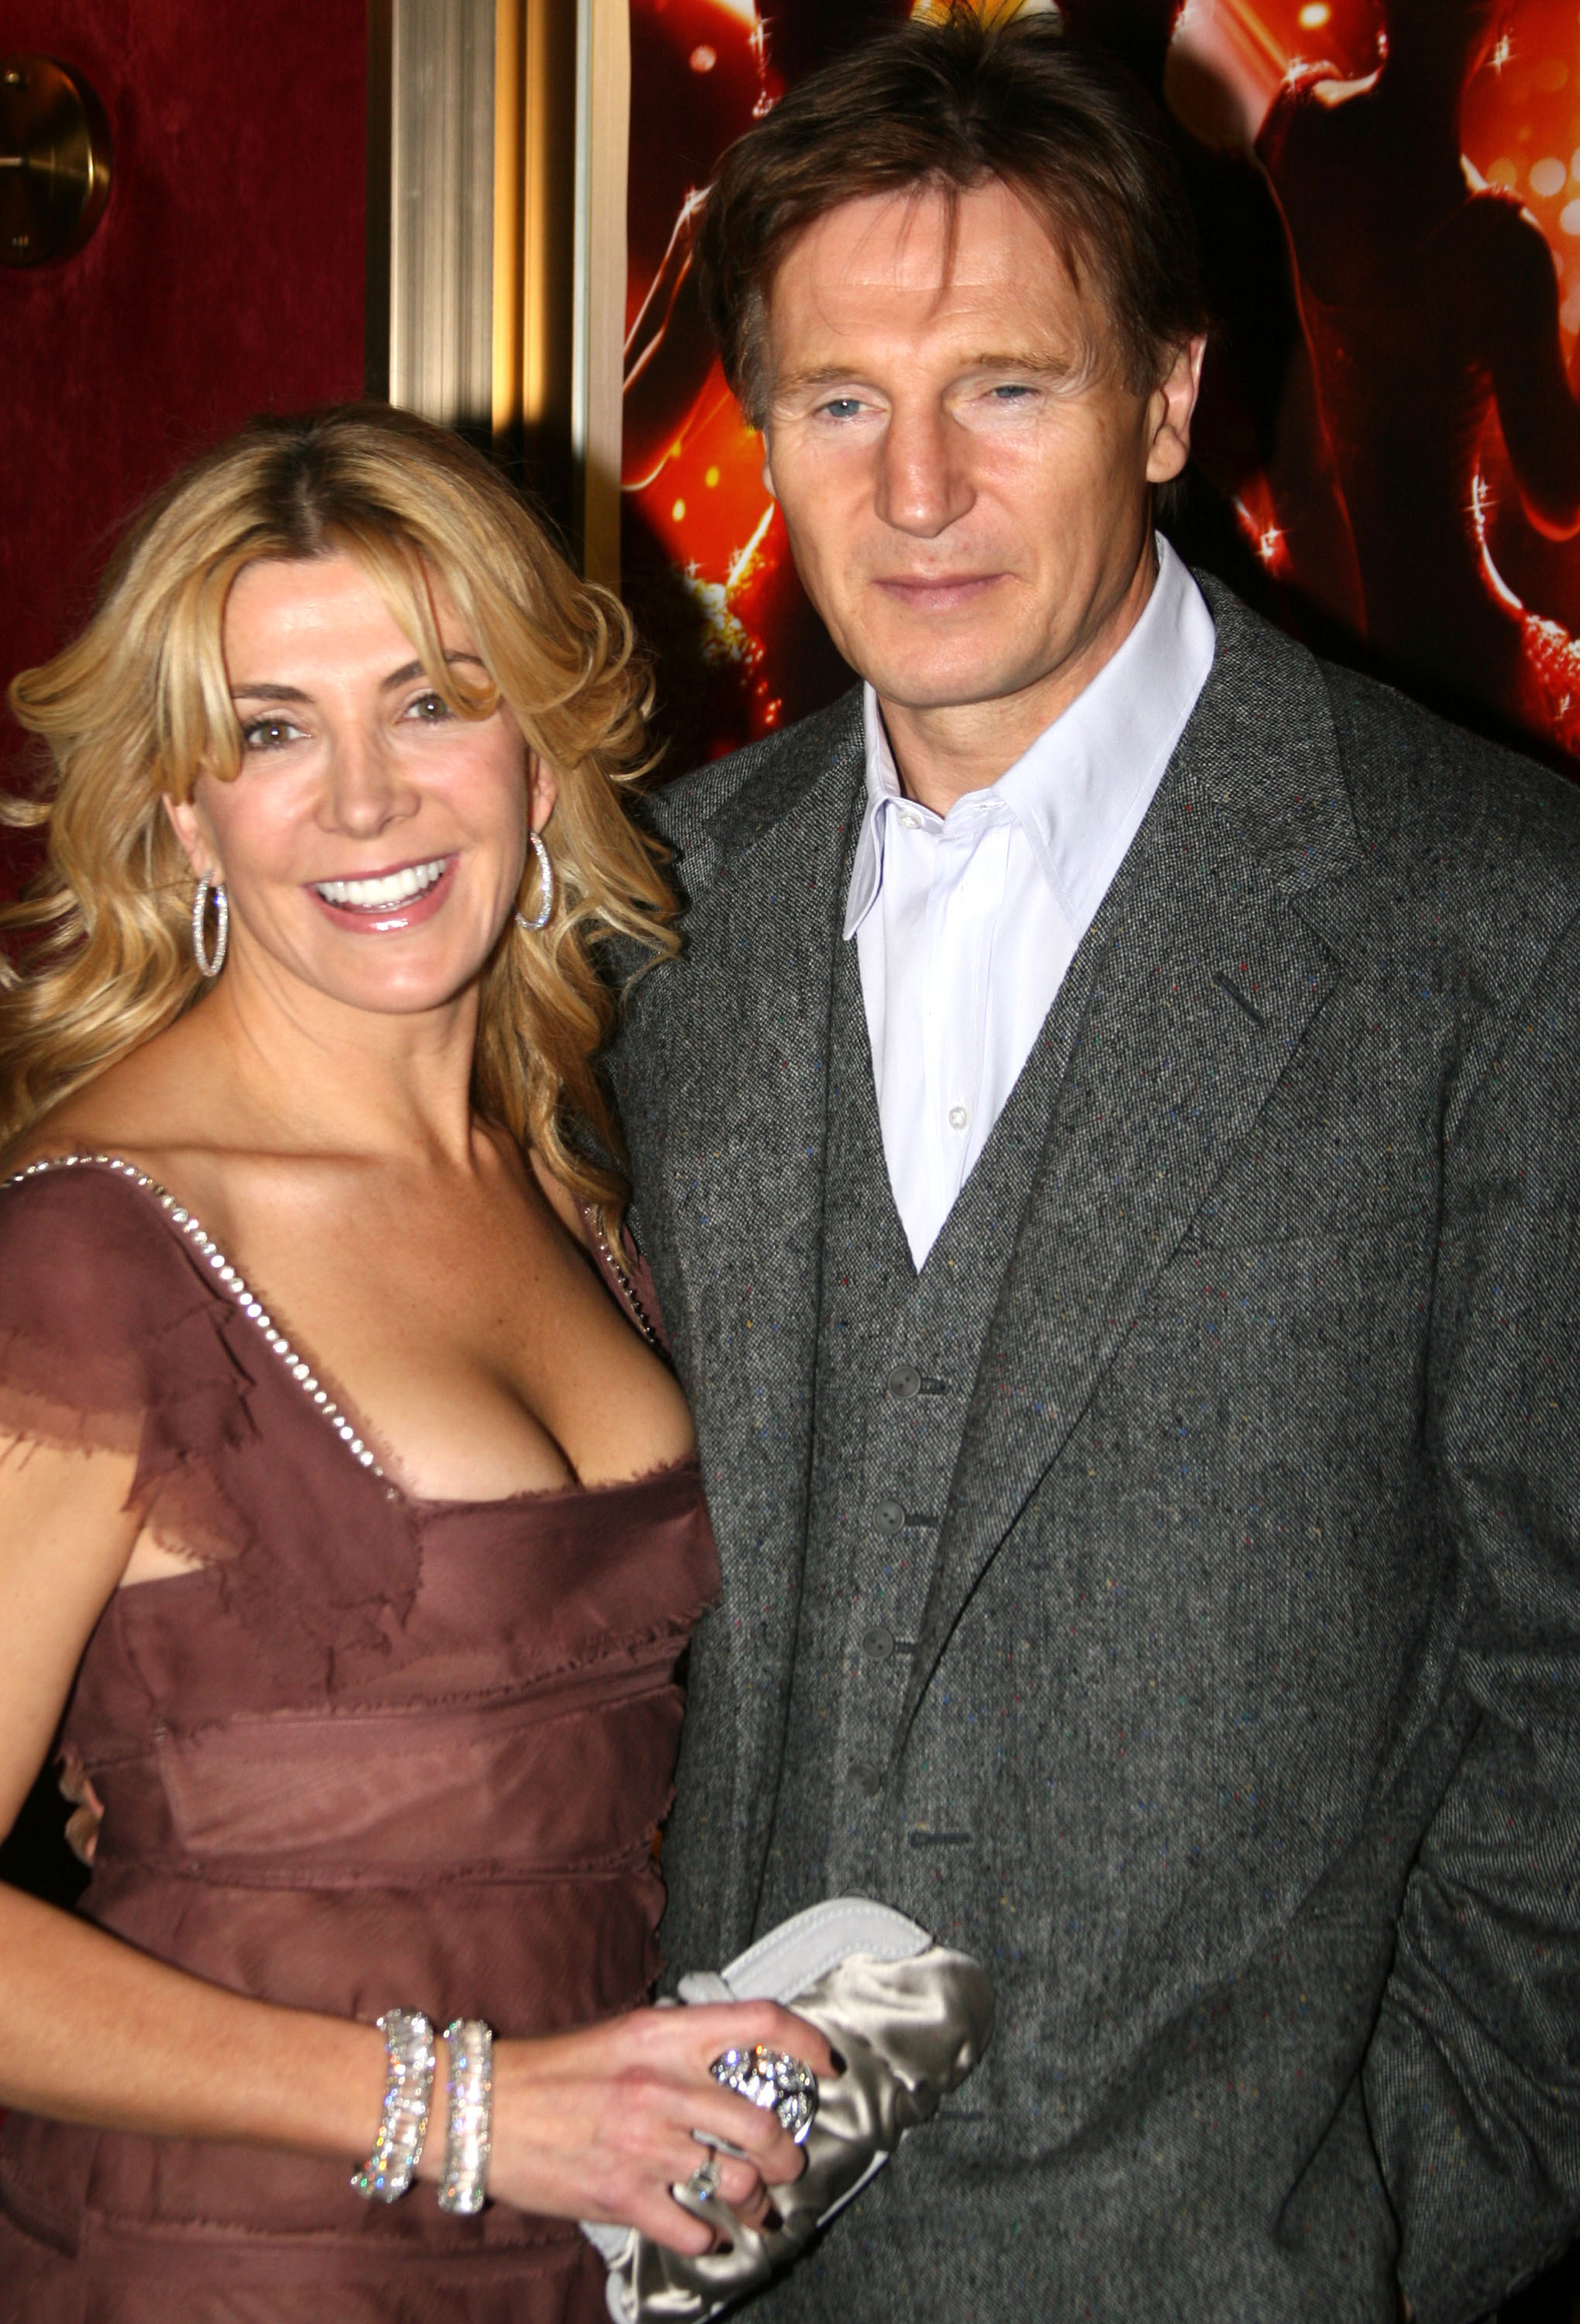 Natasha Richardson and Liam Neeson during Dreamgirls New York Premiere - Inside Arrivals at The Ziegfeld Theater in New York, NY, United States | Source: Getty Images